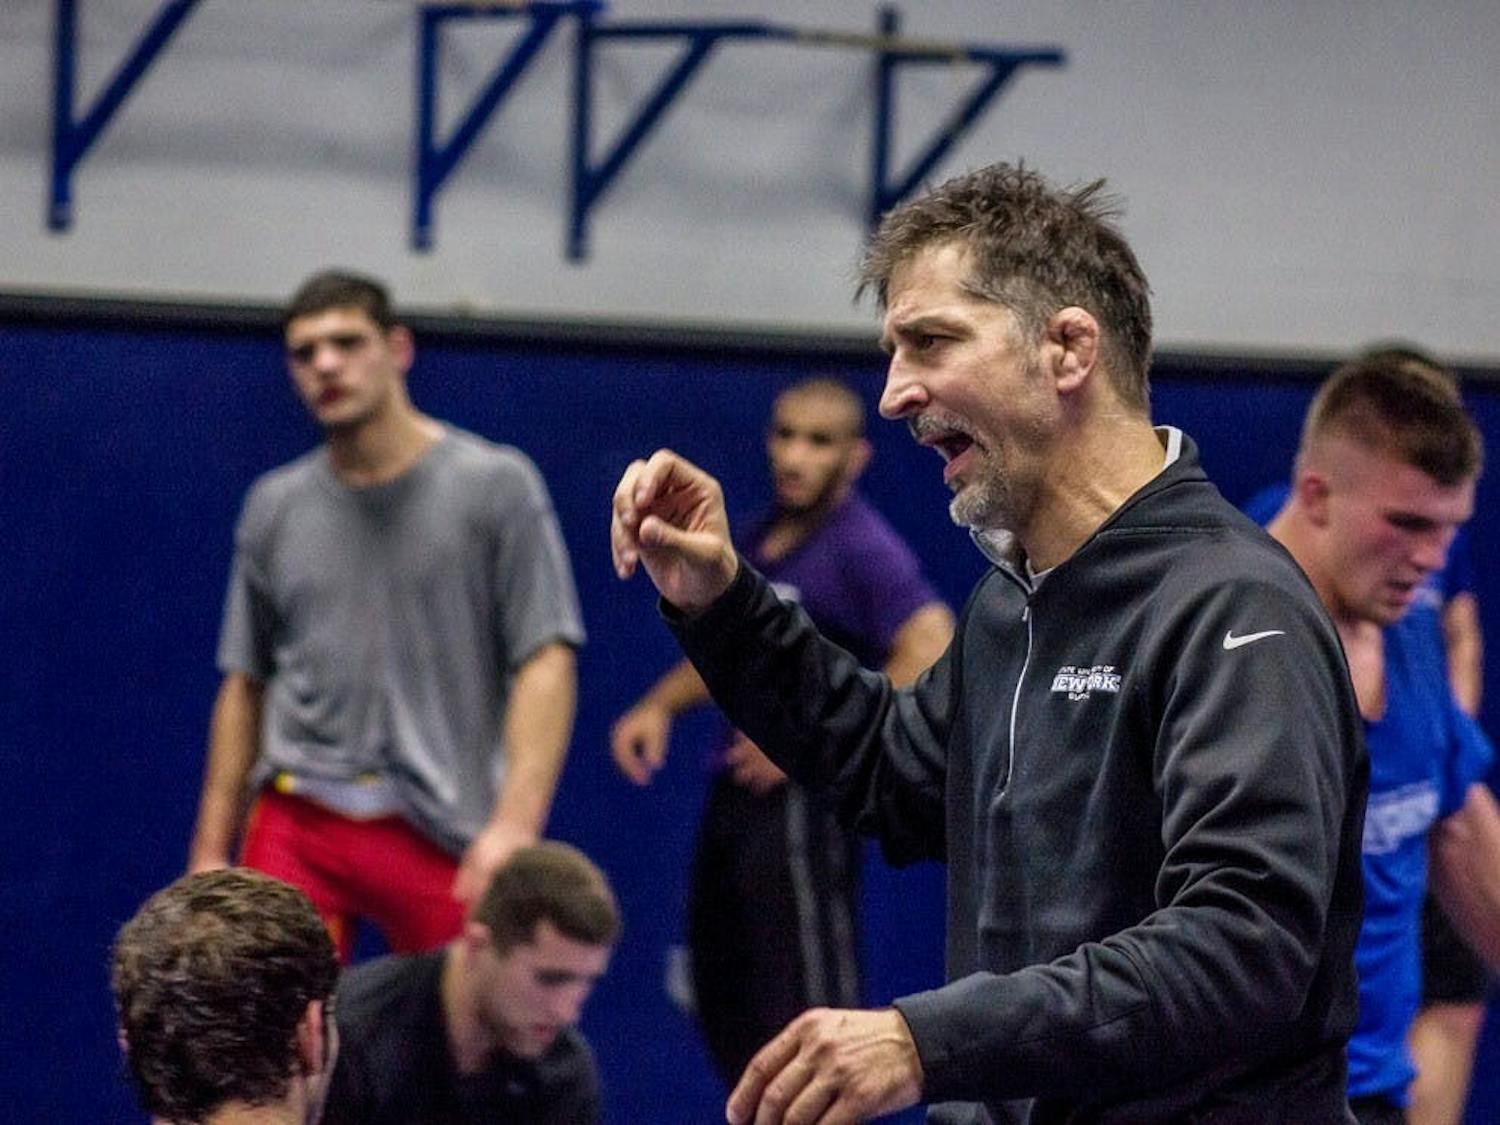 Head coach John Stutzman will have to replace multiple grapplers for next year’s squad.